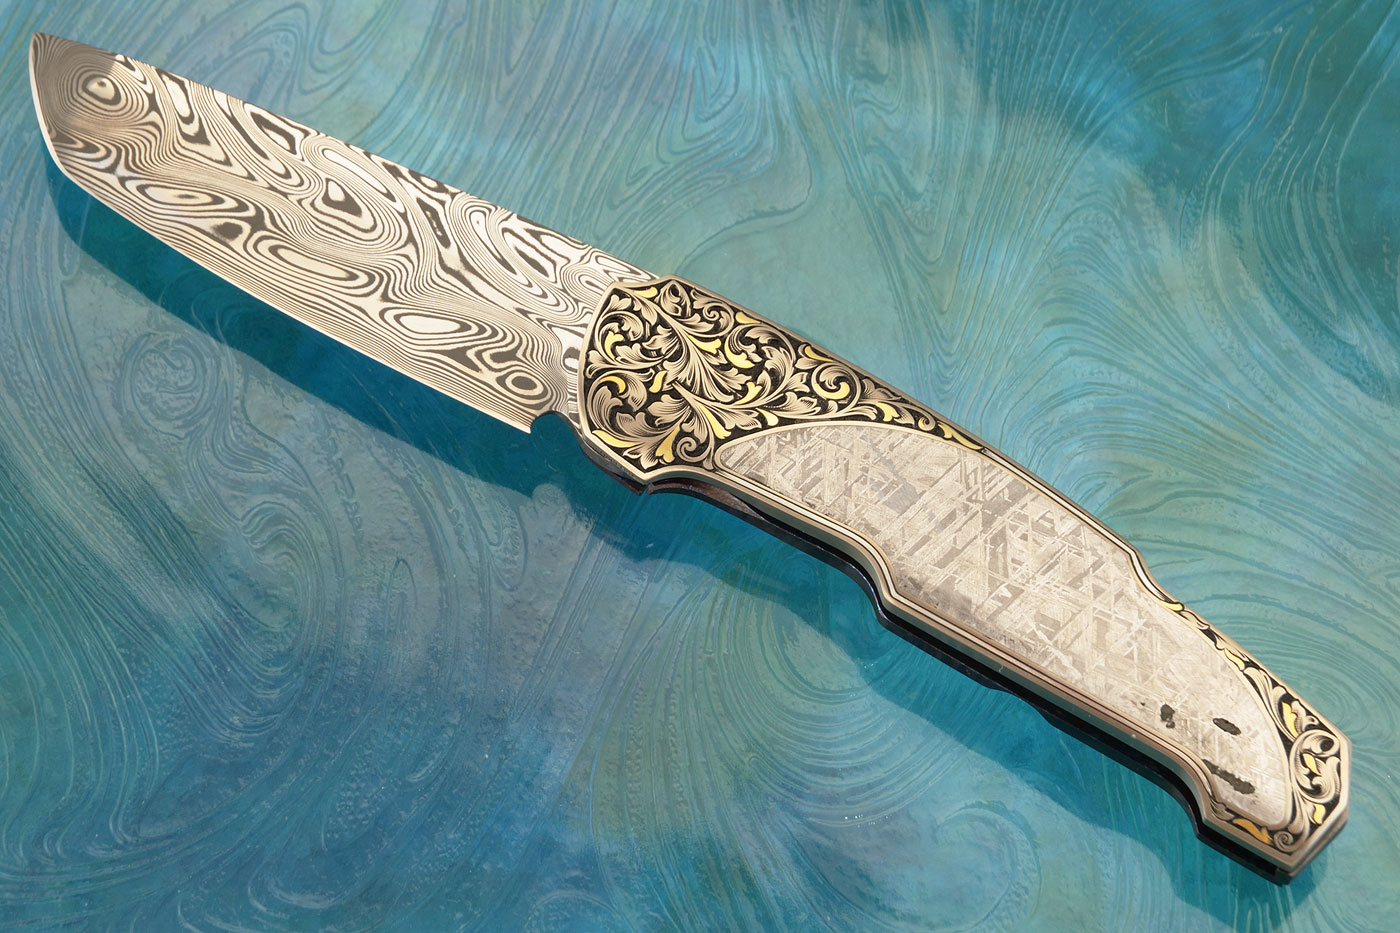 Engraved Boudicca Full Dress Front Flipper with Damasteel, Timascus, and Meteorite (Ceramic IKBS)